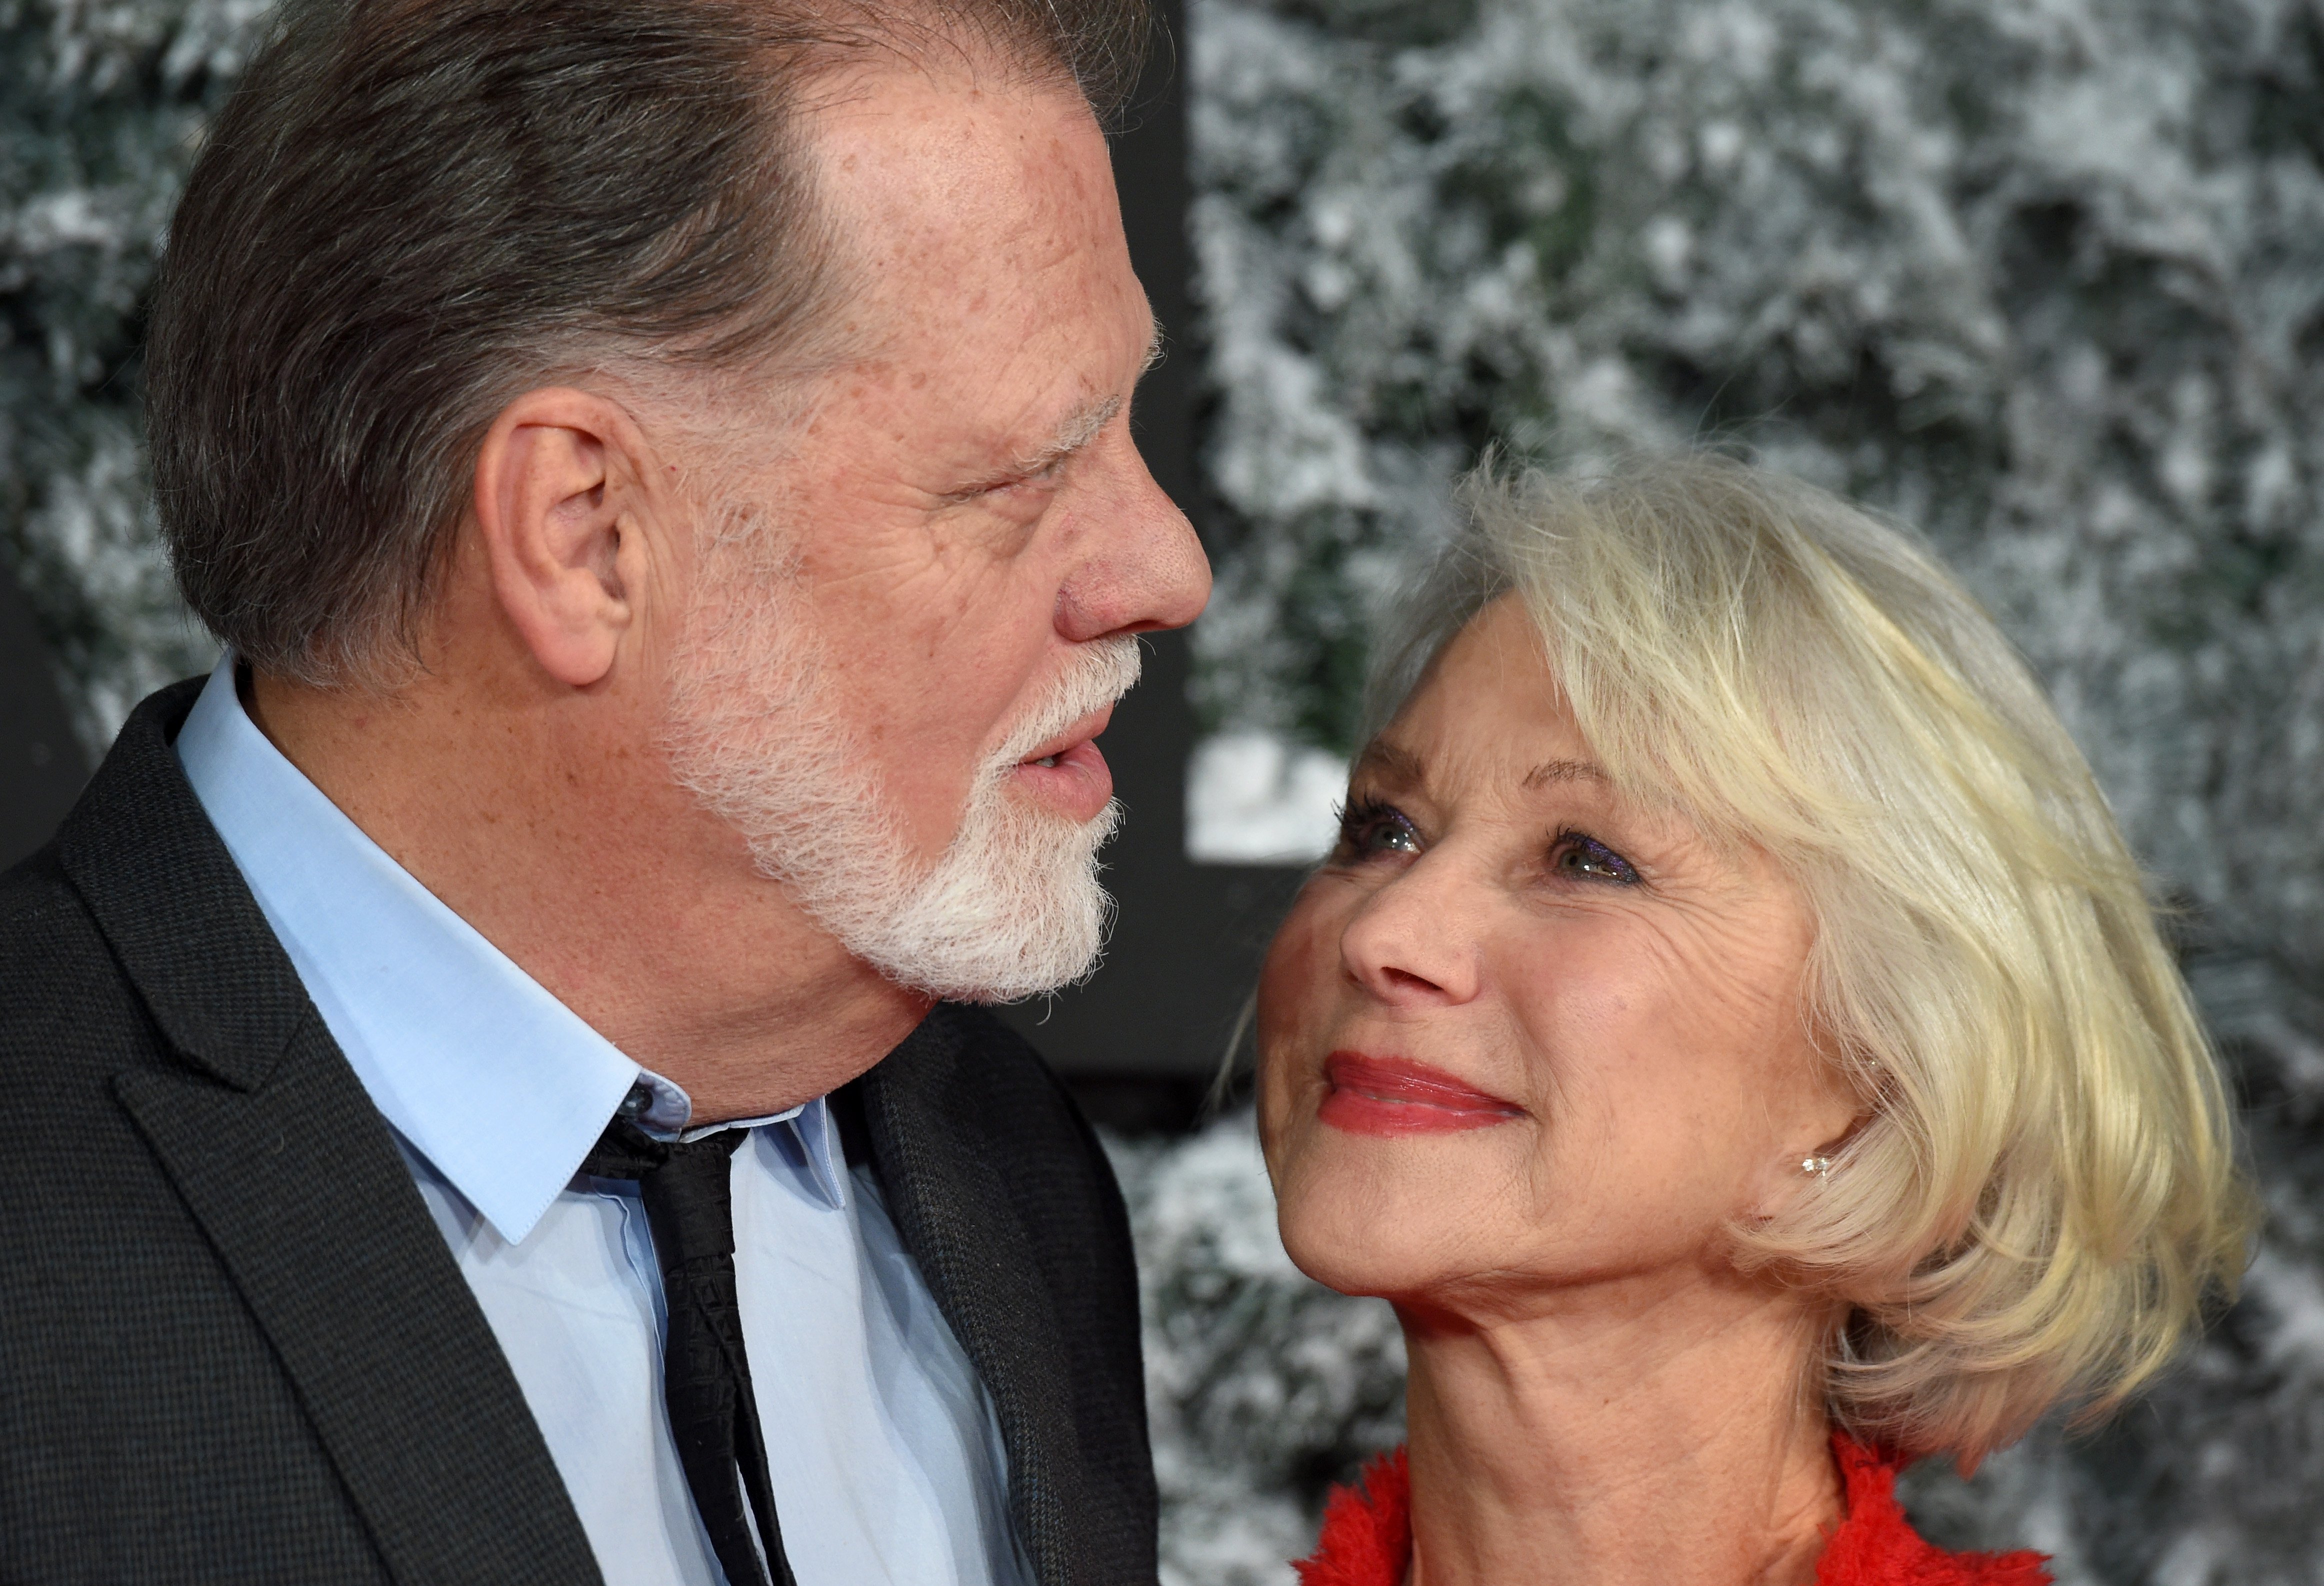 Helen Mirren and Taylor Hackford at the European premiere of "Collateral Beauty" on December 15, 2016, in London, England | Source: Getty Images